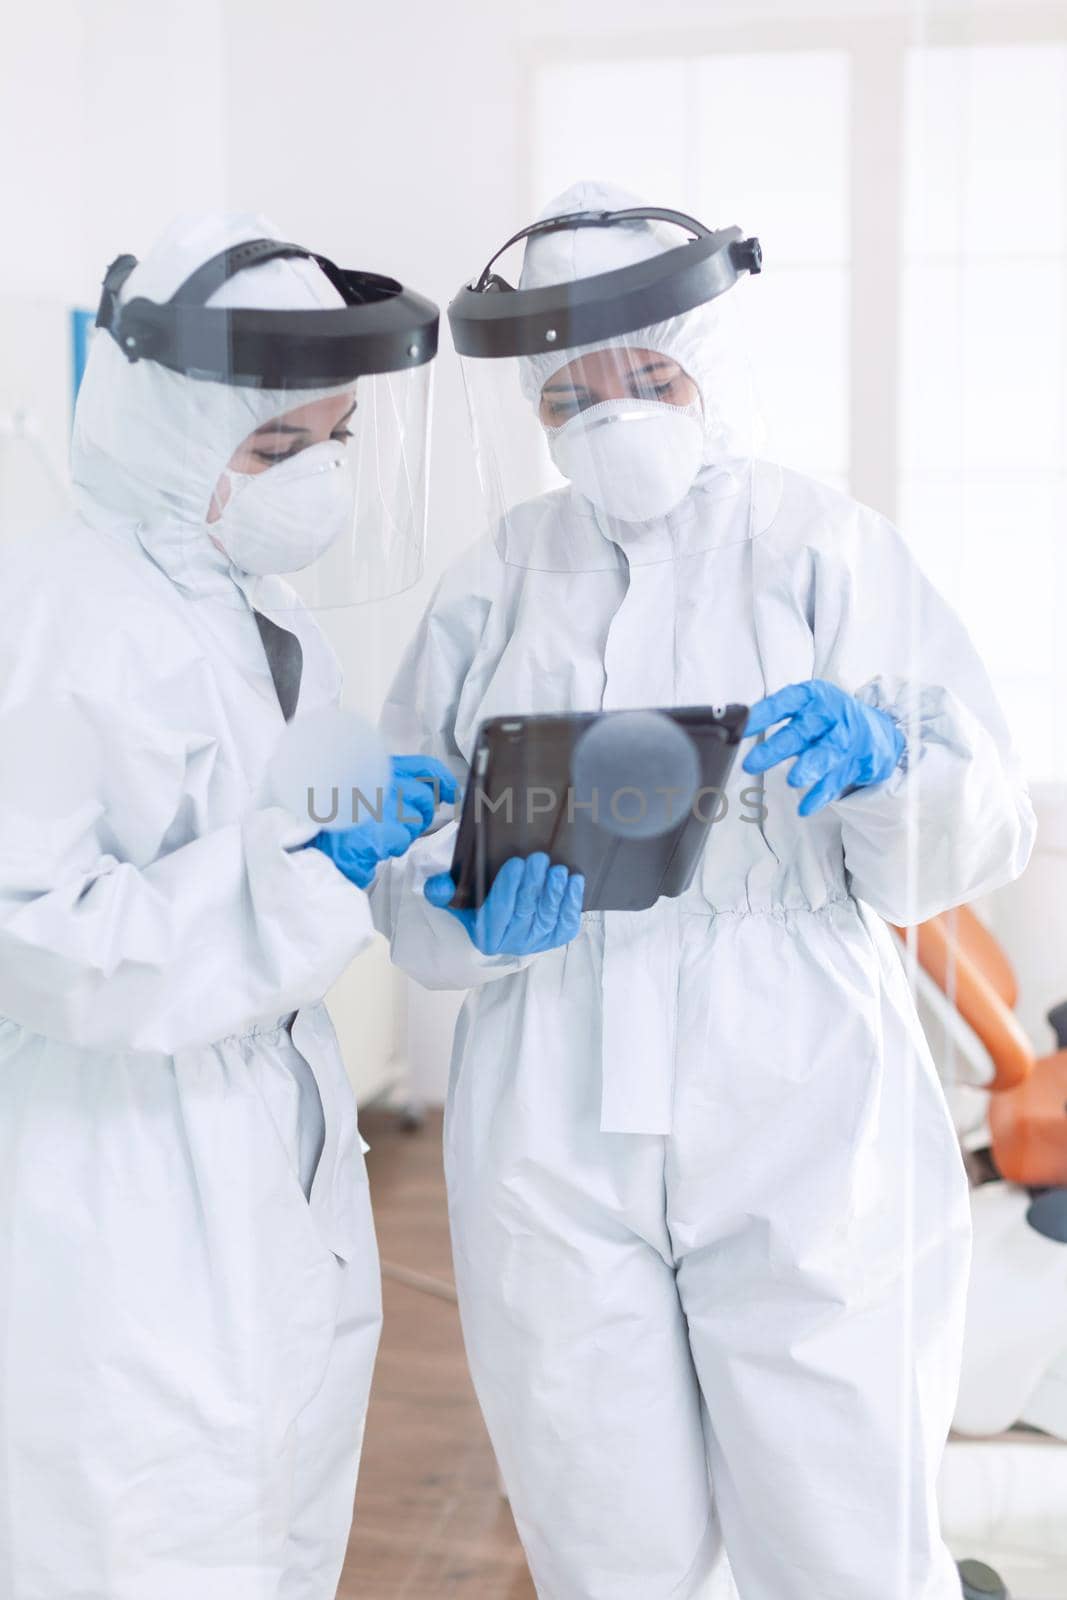 Stressed doctors dressed in ppe suit using tablet pc Stomatology team in dental office wearing protective suit agasint contagious coronavirus during global pandemic.